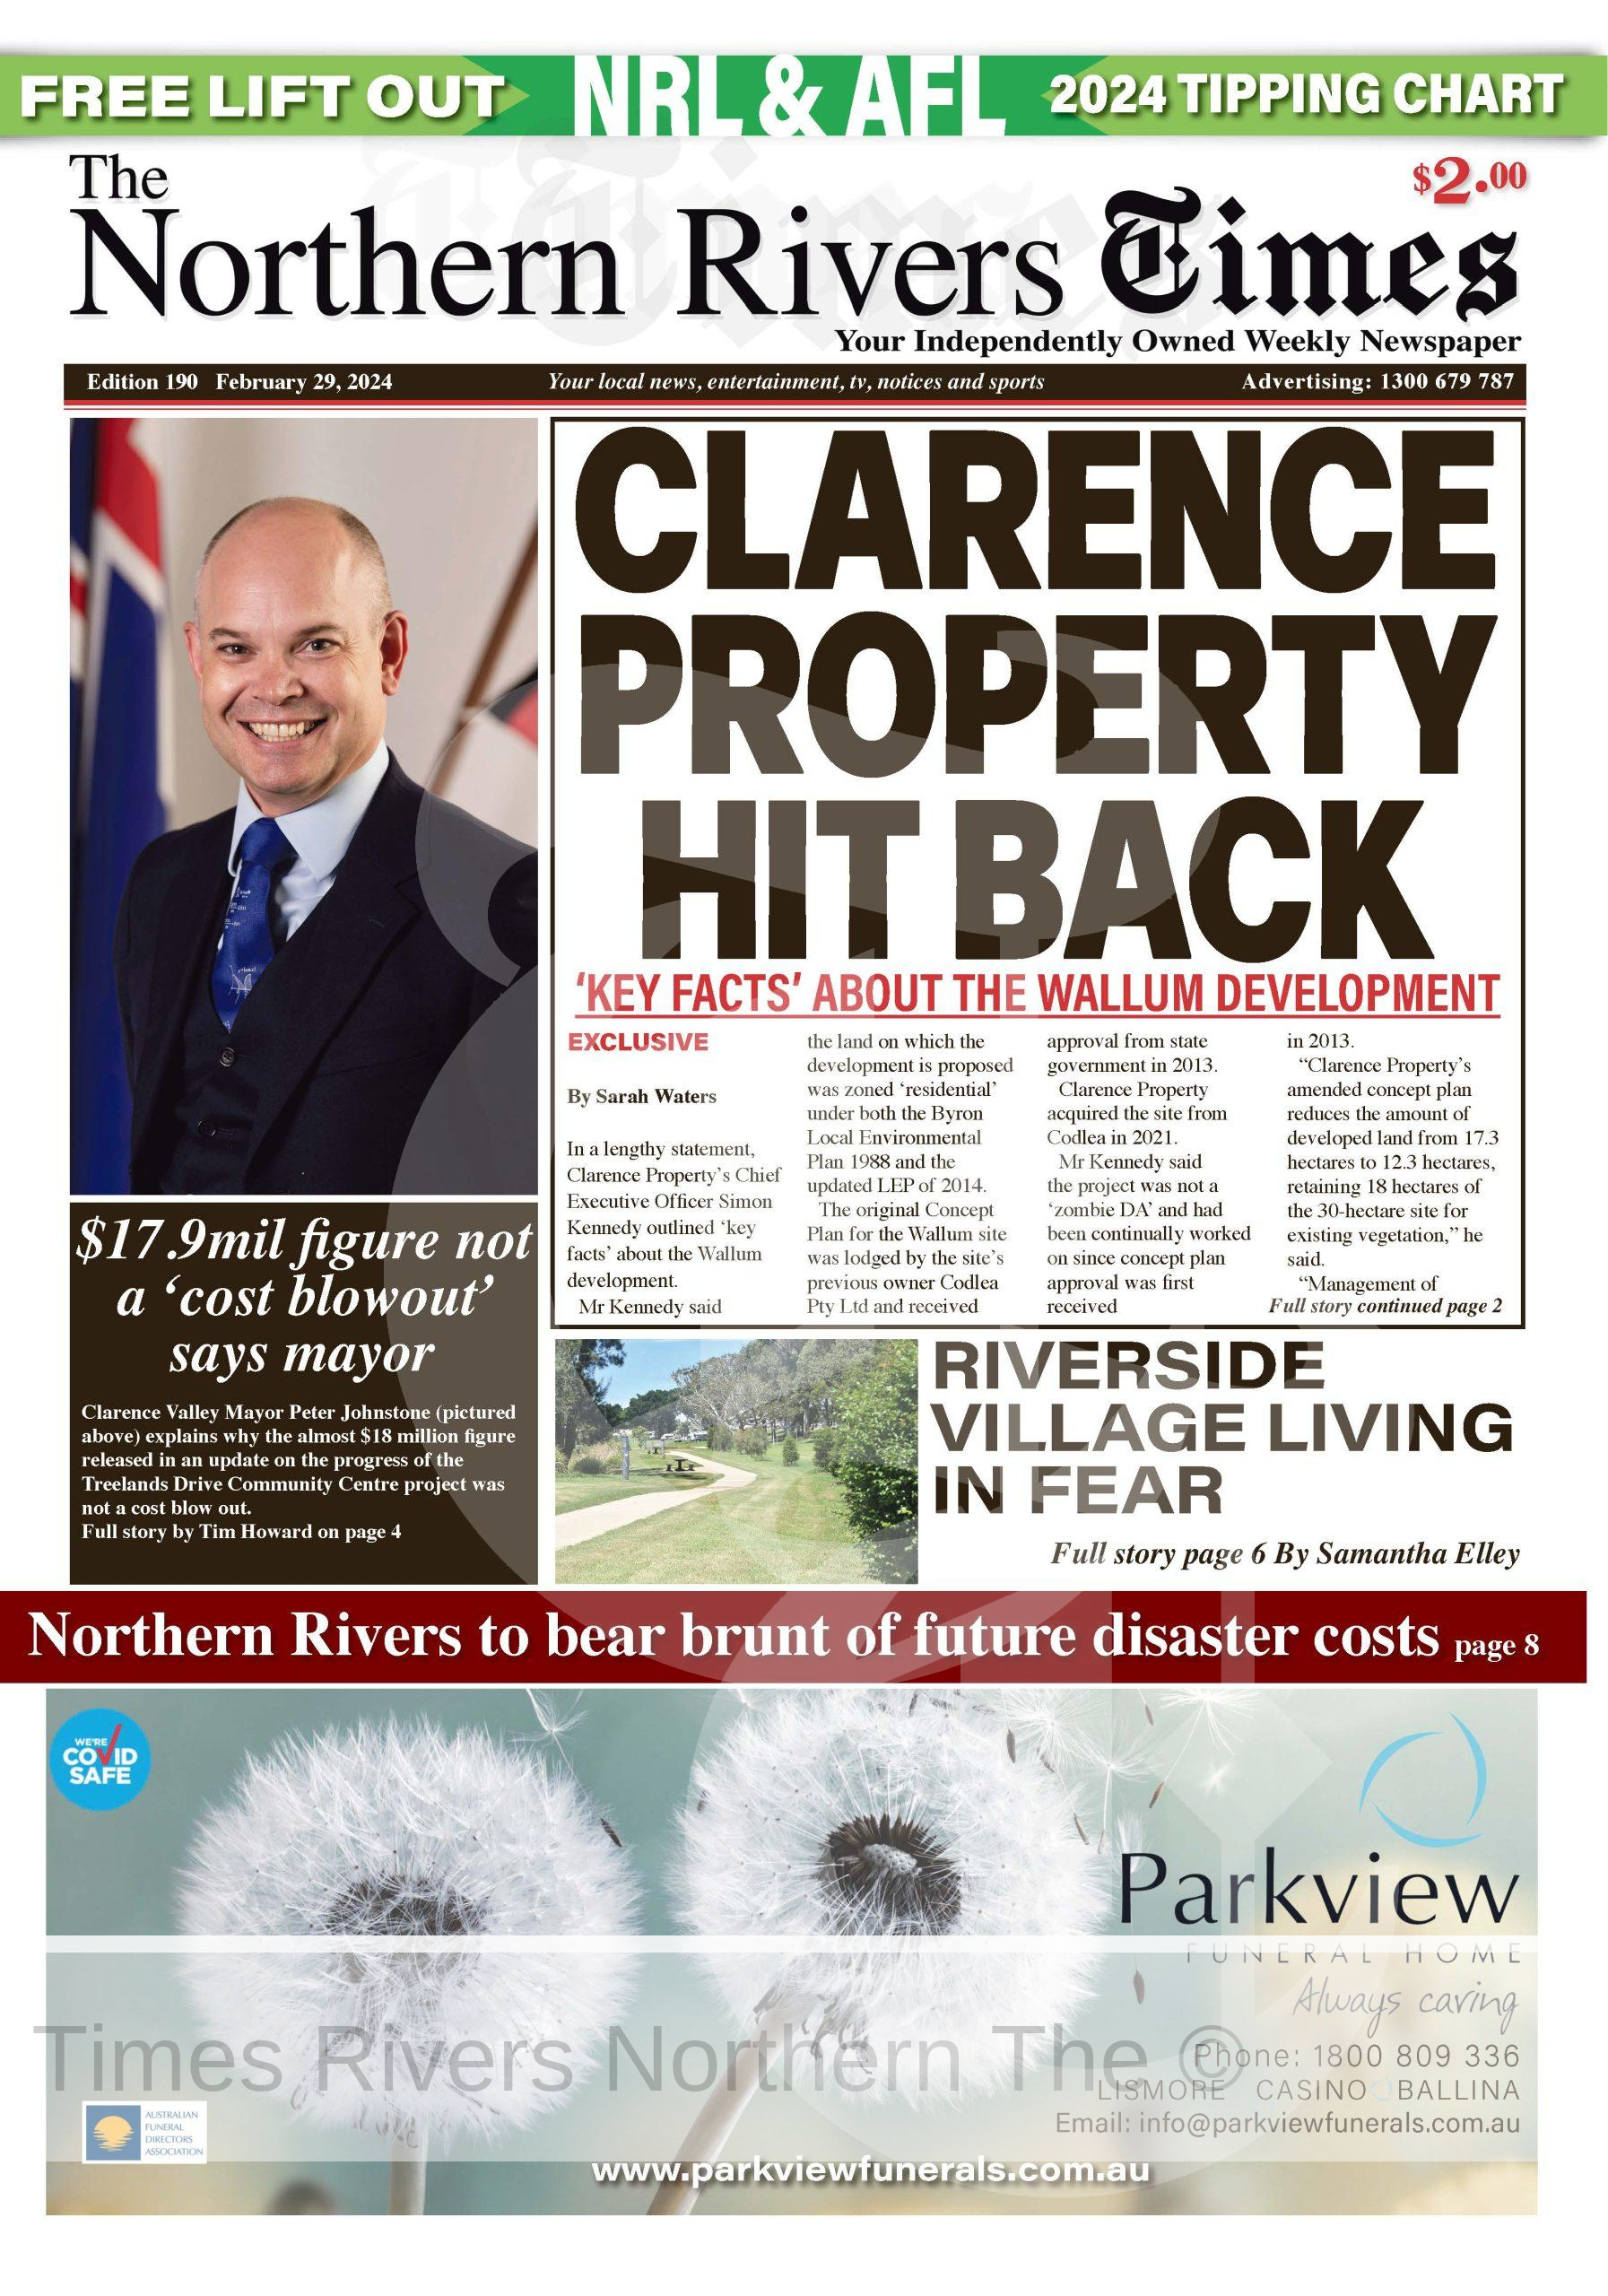 The-Northern-Rivers-Times-Edition-190-scaled.jpg